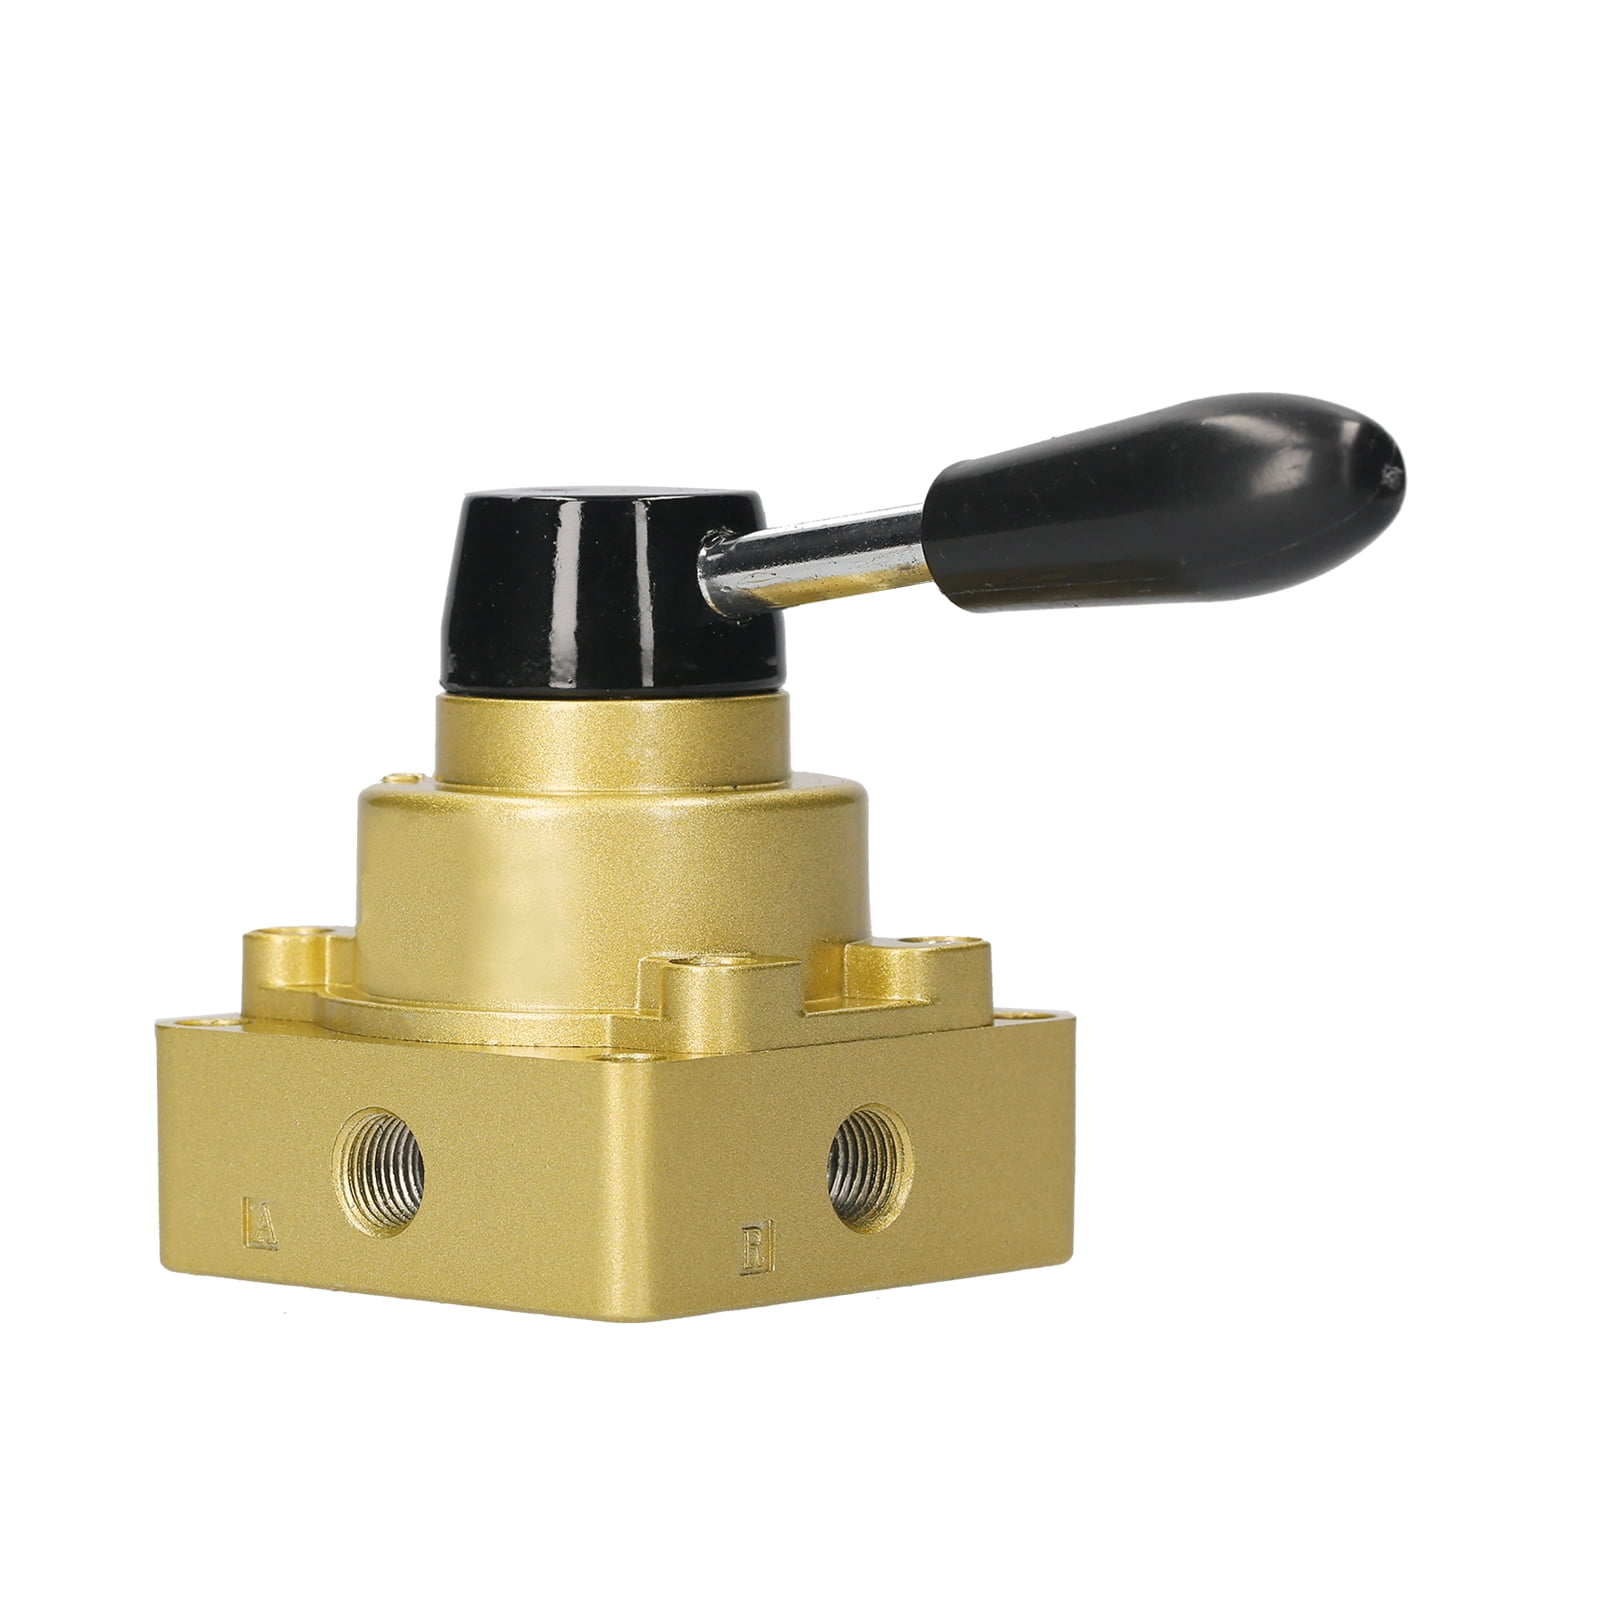 4 Way 2 Position Hand Operated Lever Pneumatic Air Valve 3/8 NPT 